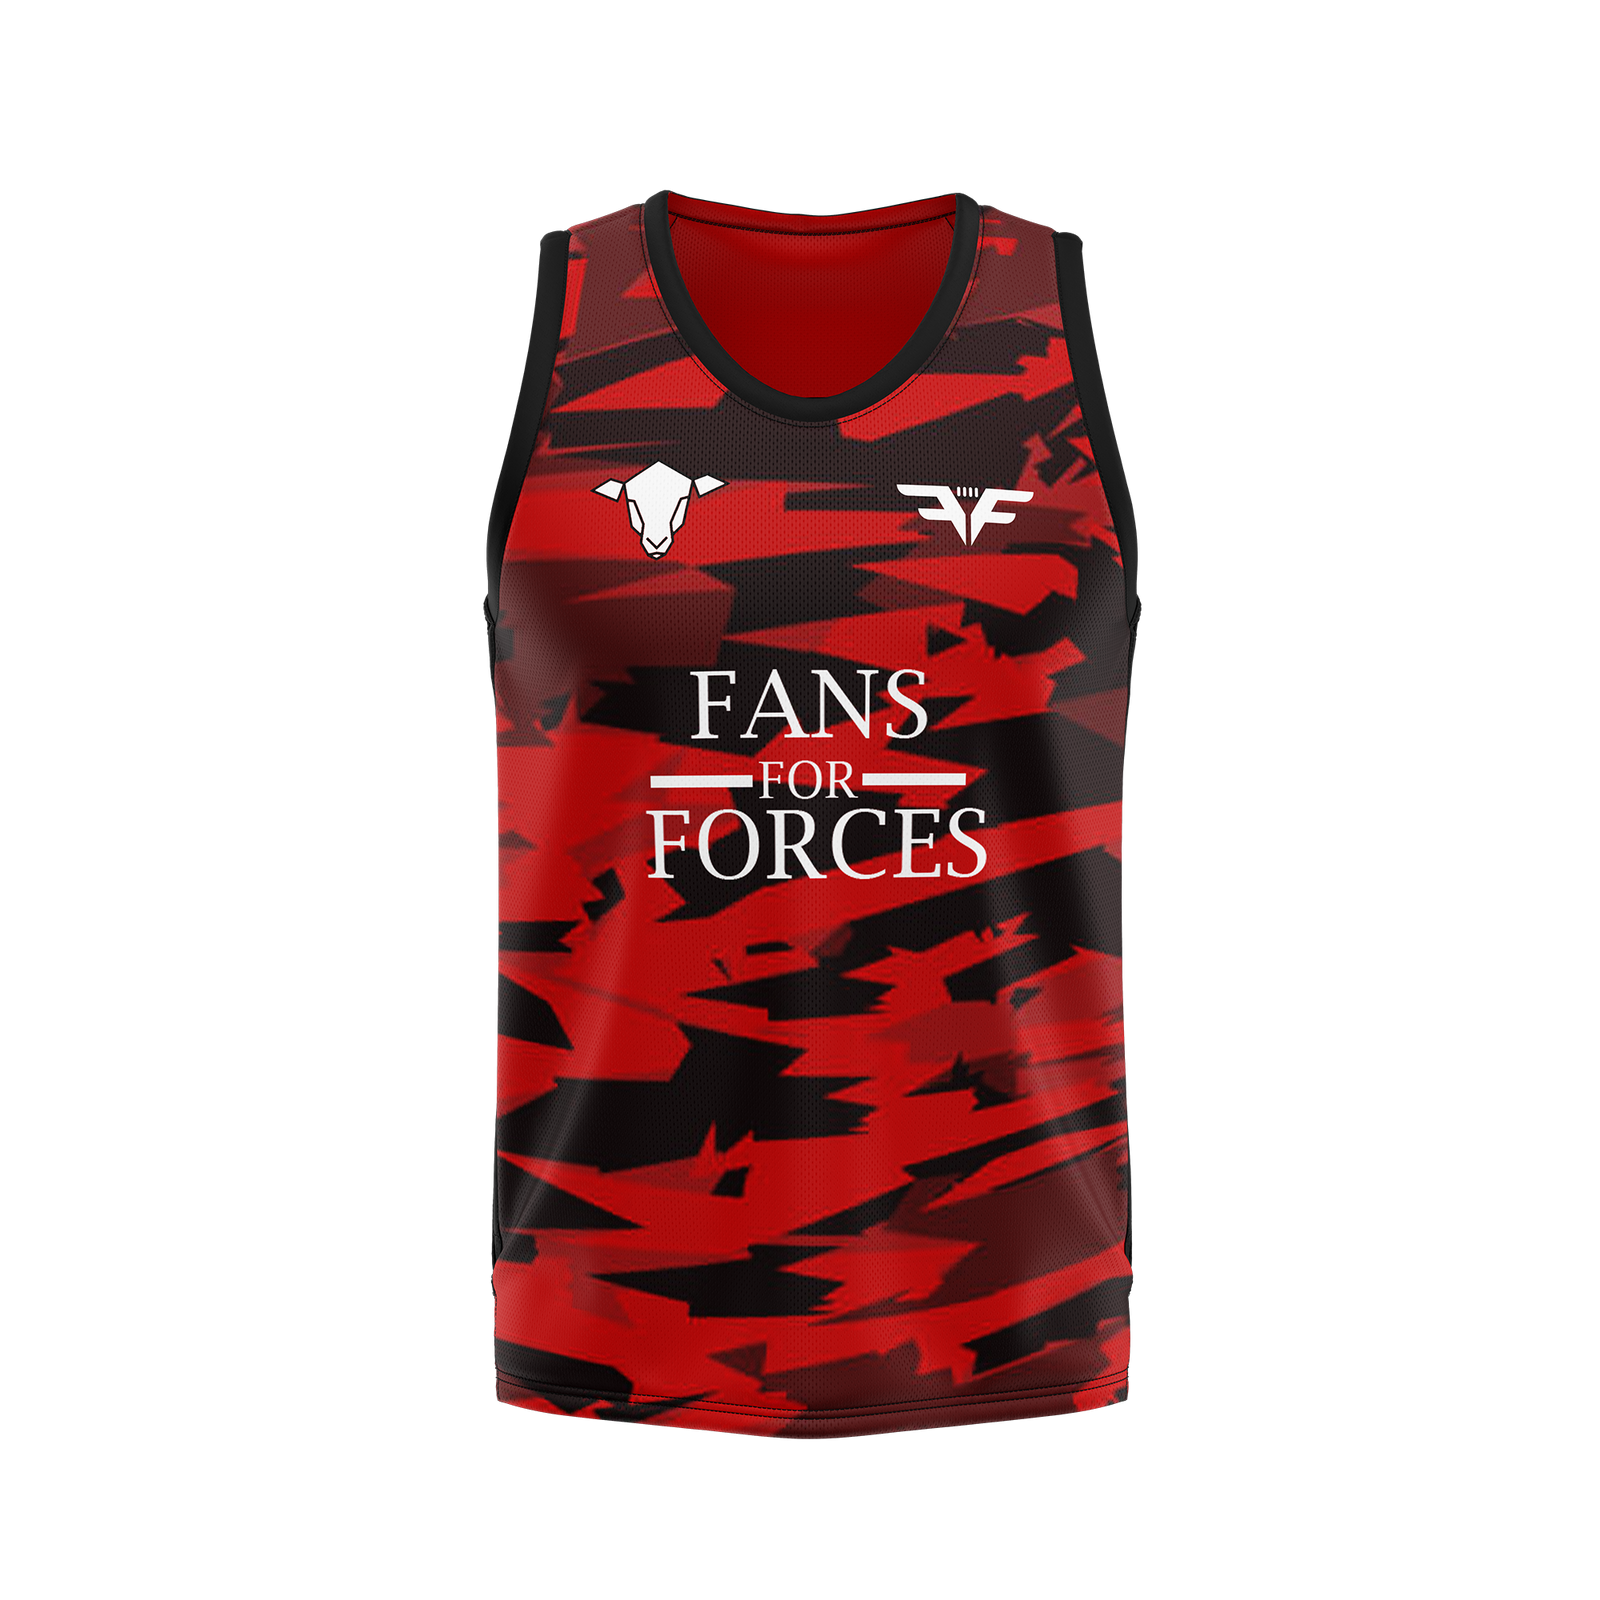 Childrens Fans for Forces Heart Charity Vest